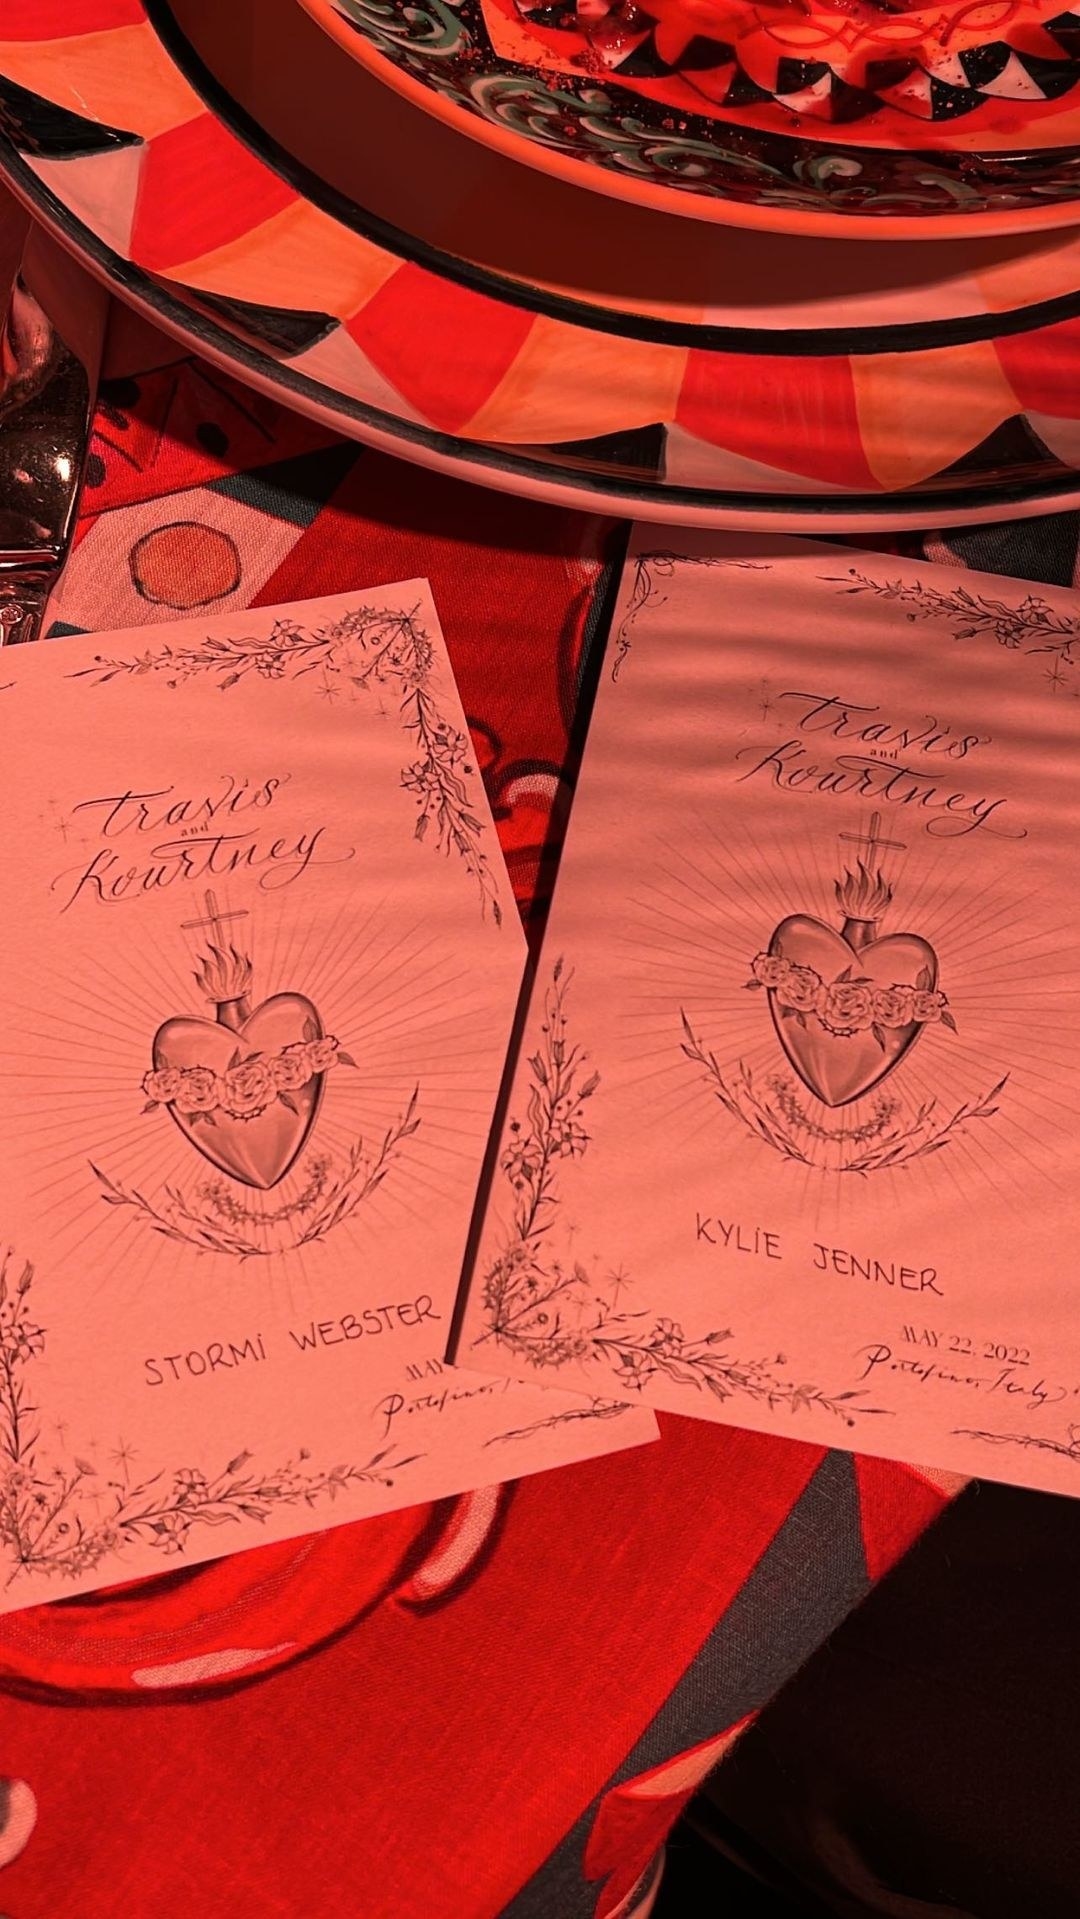 The place settings feature a flaming heart in the center, with Travis and Kourtney&#x27;s names above the heart and the guest&#x27;s name below it